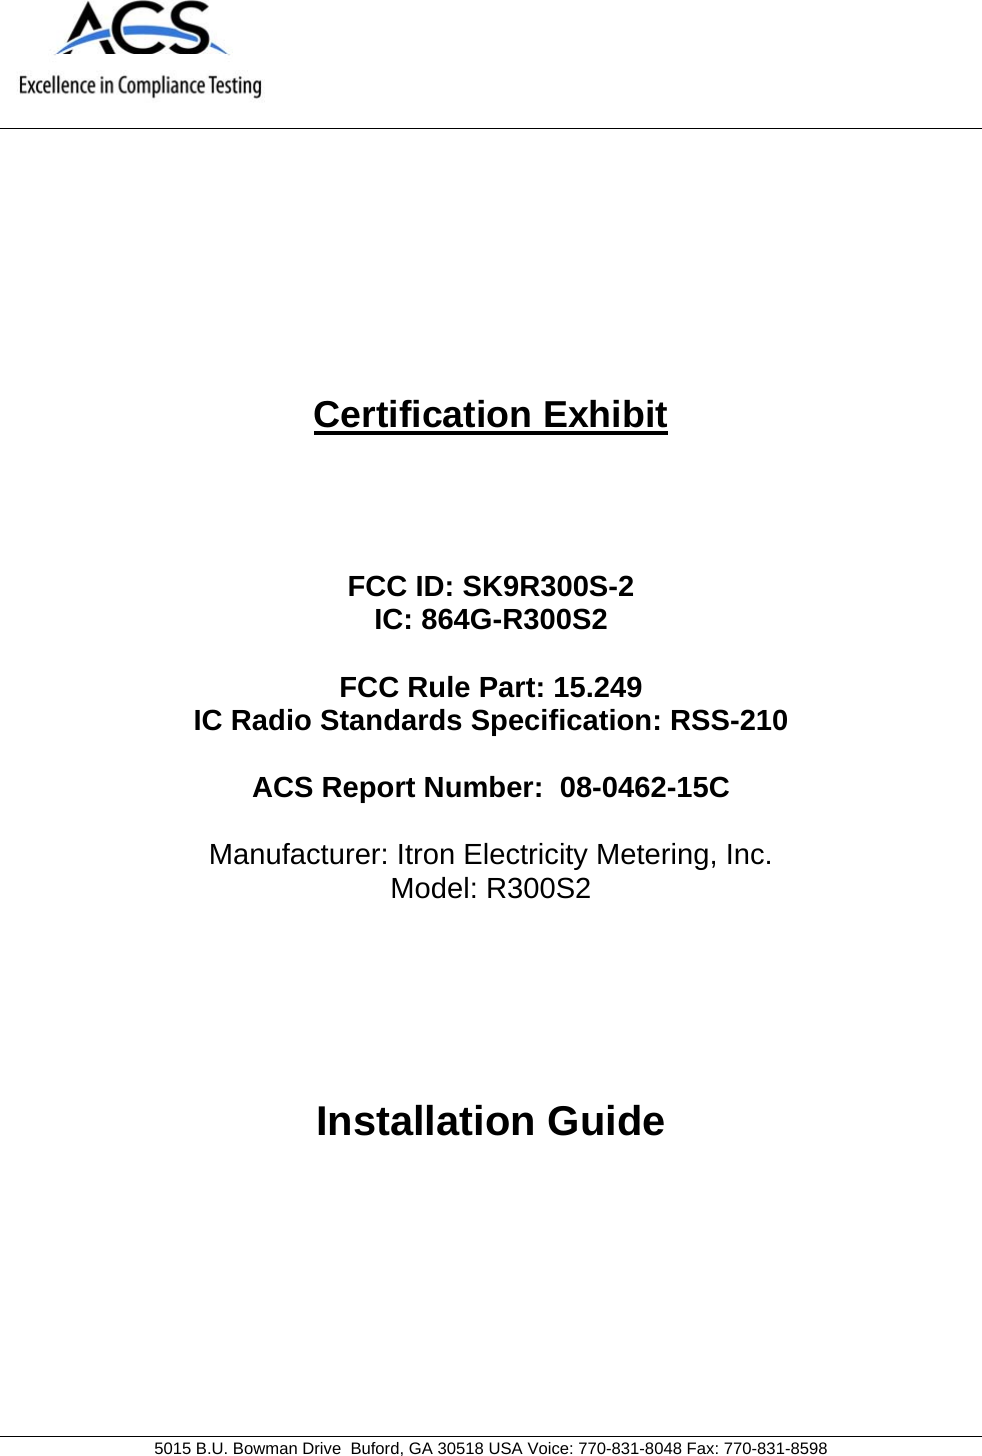     5015 B.U. Bowman Drive  Buford, GA 30518 USA Voice: 770-831-8048 Fax: 770-831-8598   Certification Exhibit     FCC ID: SK9R300S-2  IC: 864G-R300S2  FCC Rule Part: 15.249 IC Radio Standards Specification: RSS-210  ACS Report Number:  08-0462-15C   Manufacturer: Itron Electricity Metering, Inc. Model: R300S2     Installation Guide  